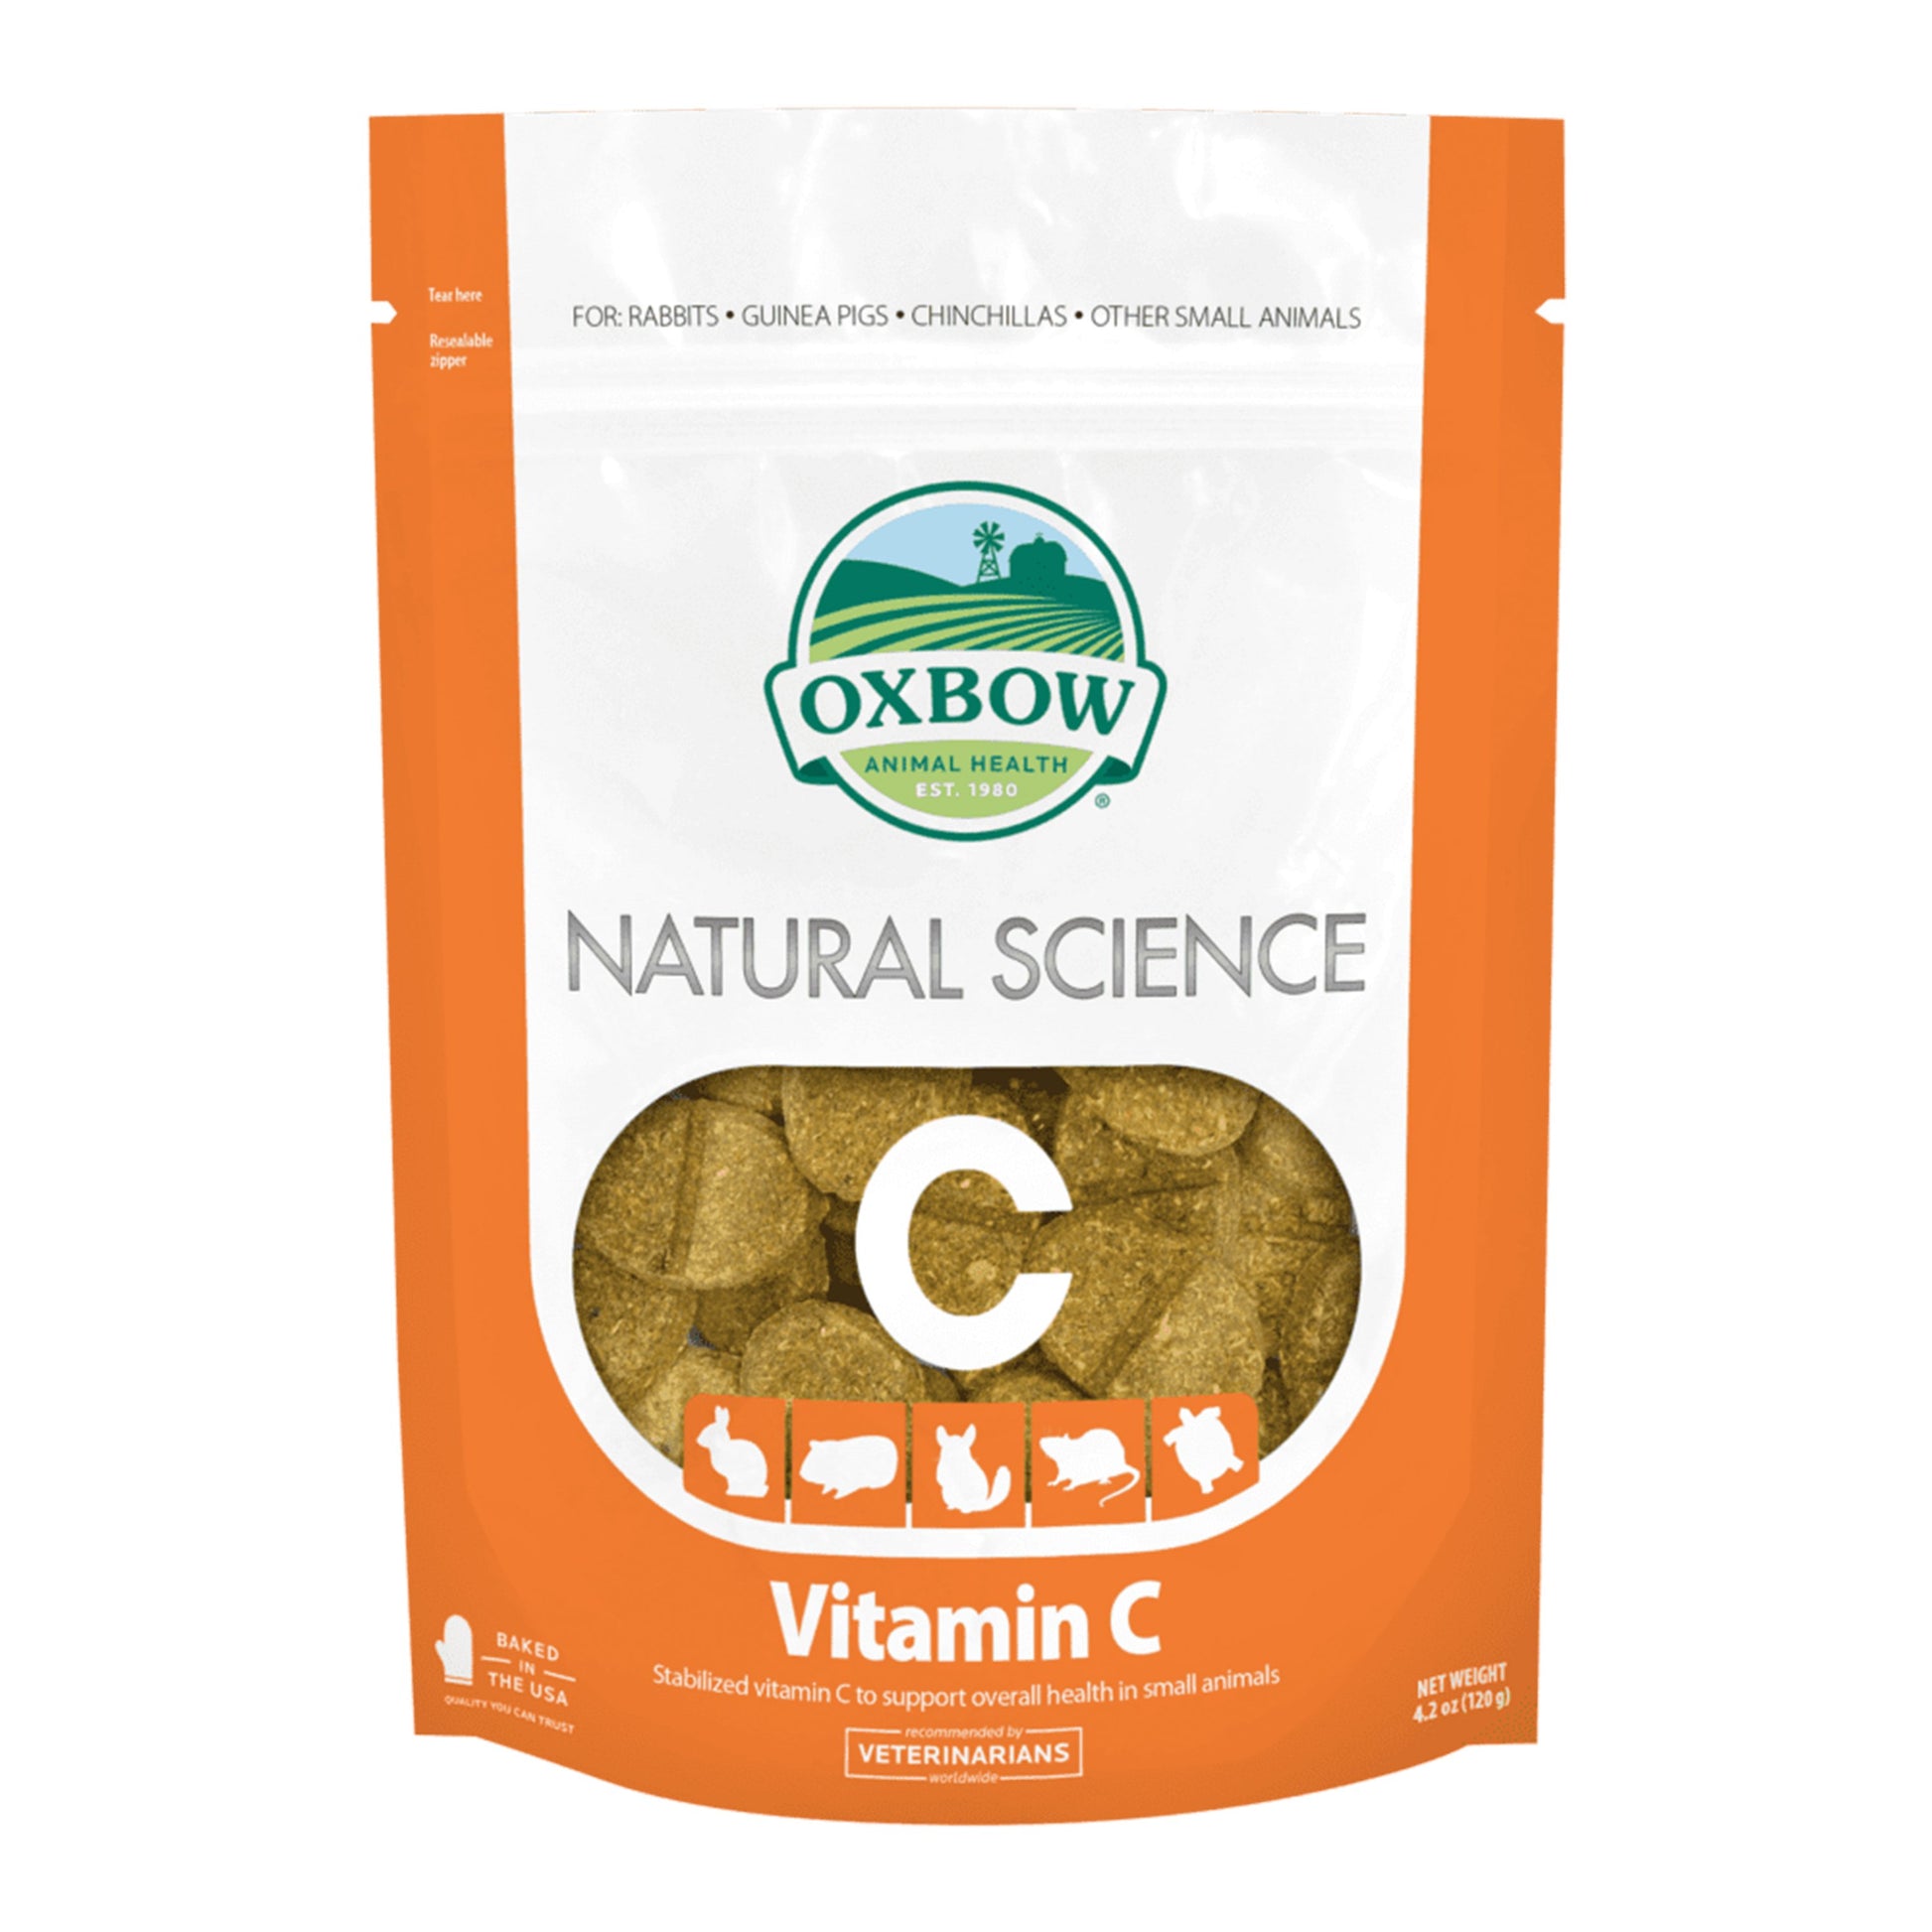 Oxbow Animal Health Natural Science Small Animal Vitamin C Support Supplement, 4.2 oz, Oxbow